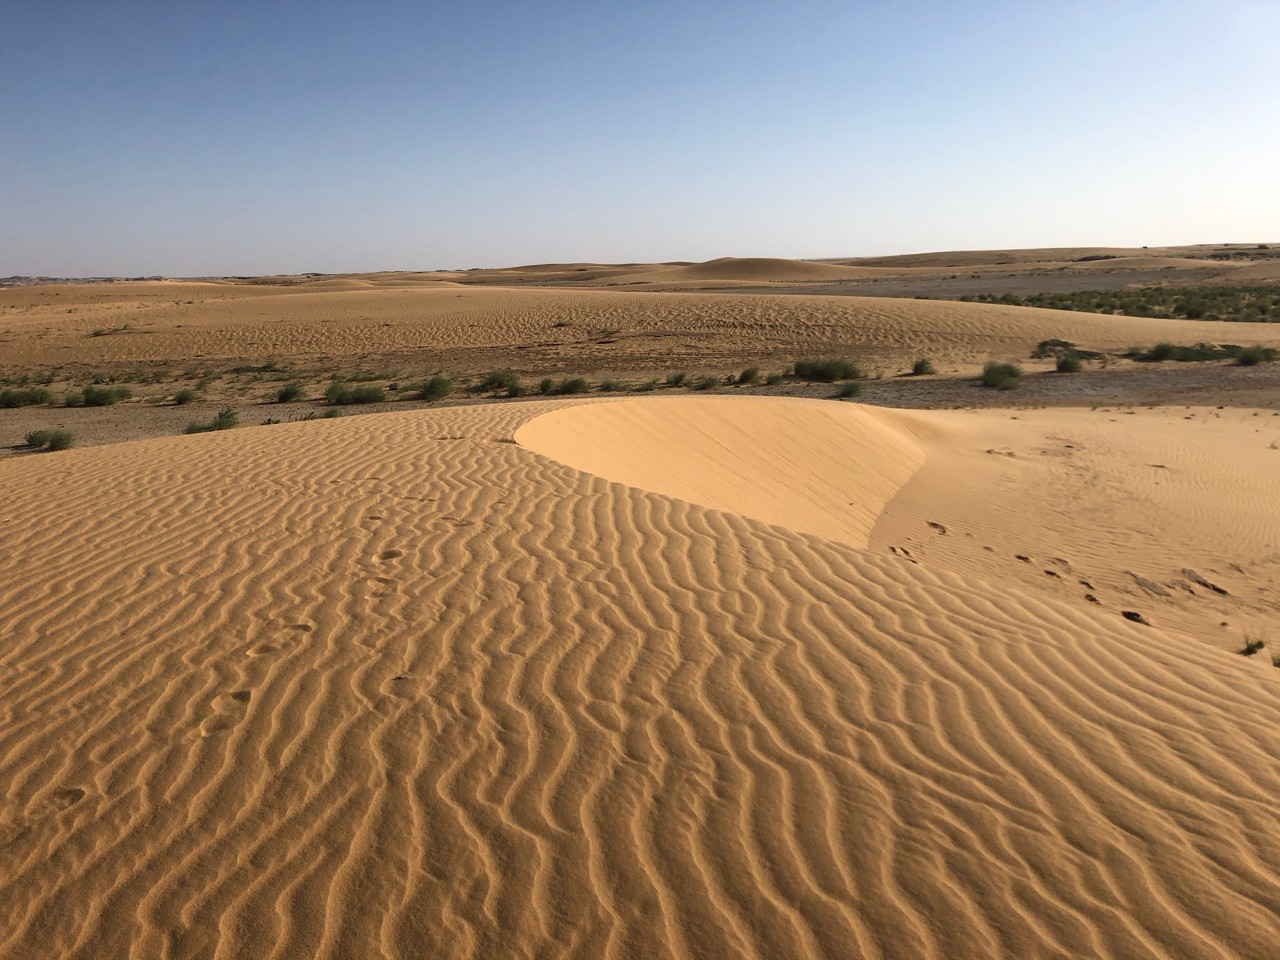 A view along the crest of a barkhan dune in the Sahara Desert, en route to Gobero, Niger in 2019.